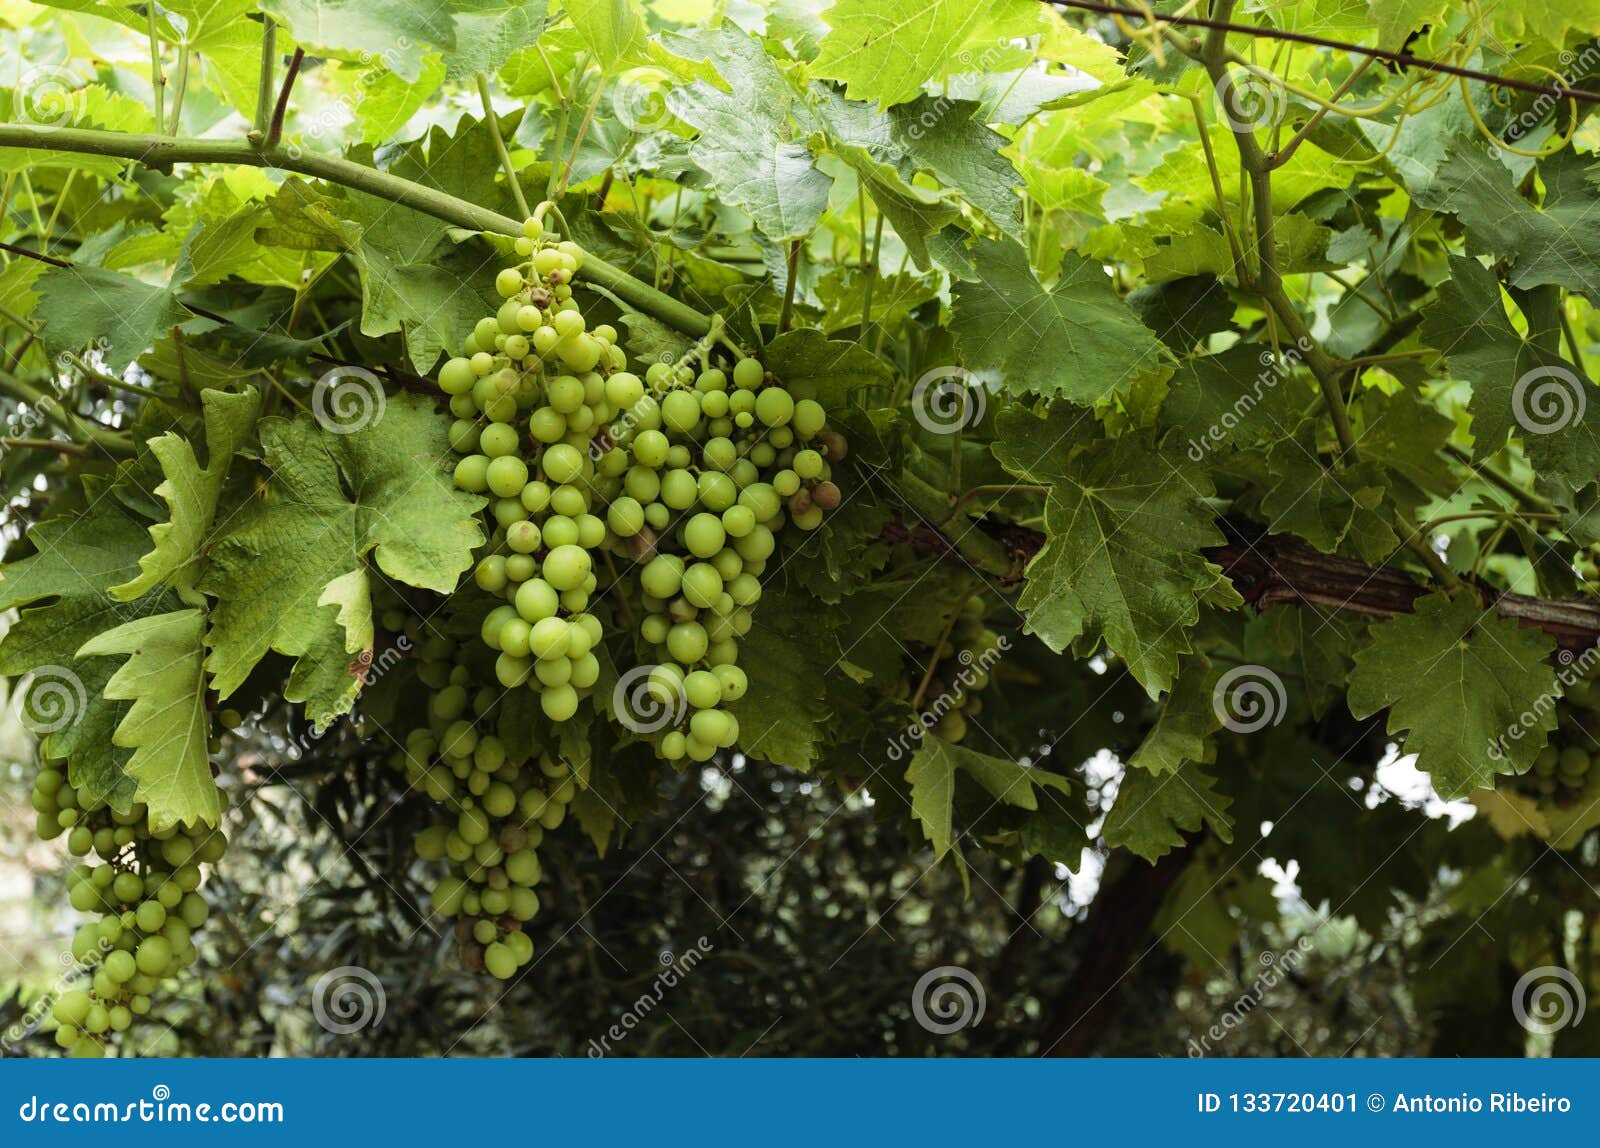 Trellis With Grapes In The Backyard Stock Image Image Of Variety Farming 133720401